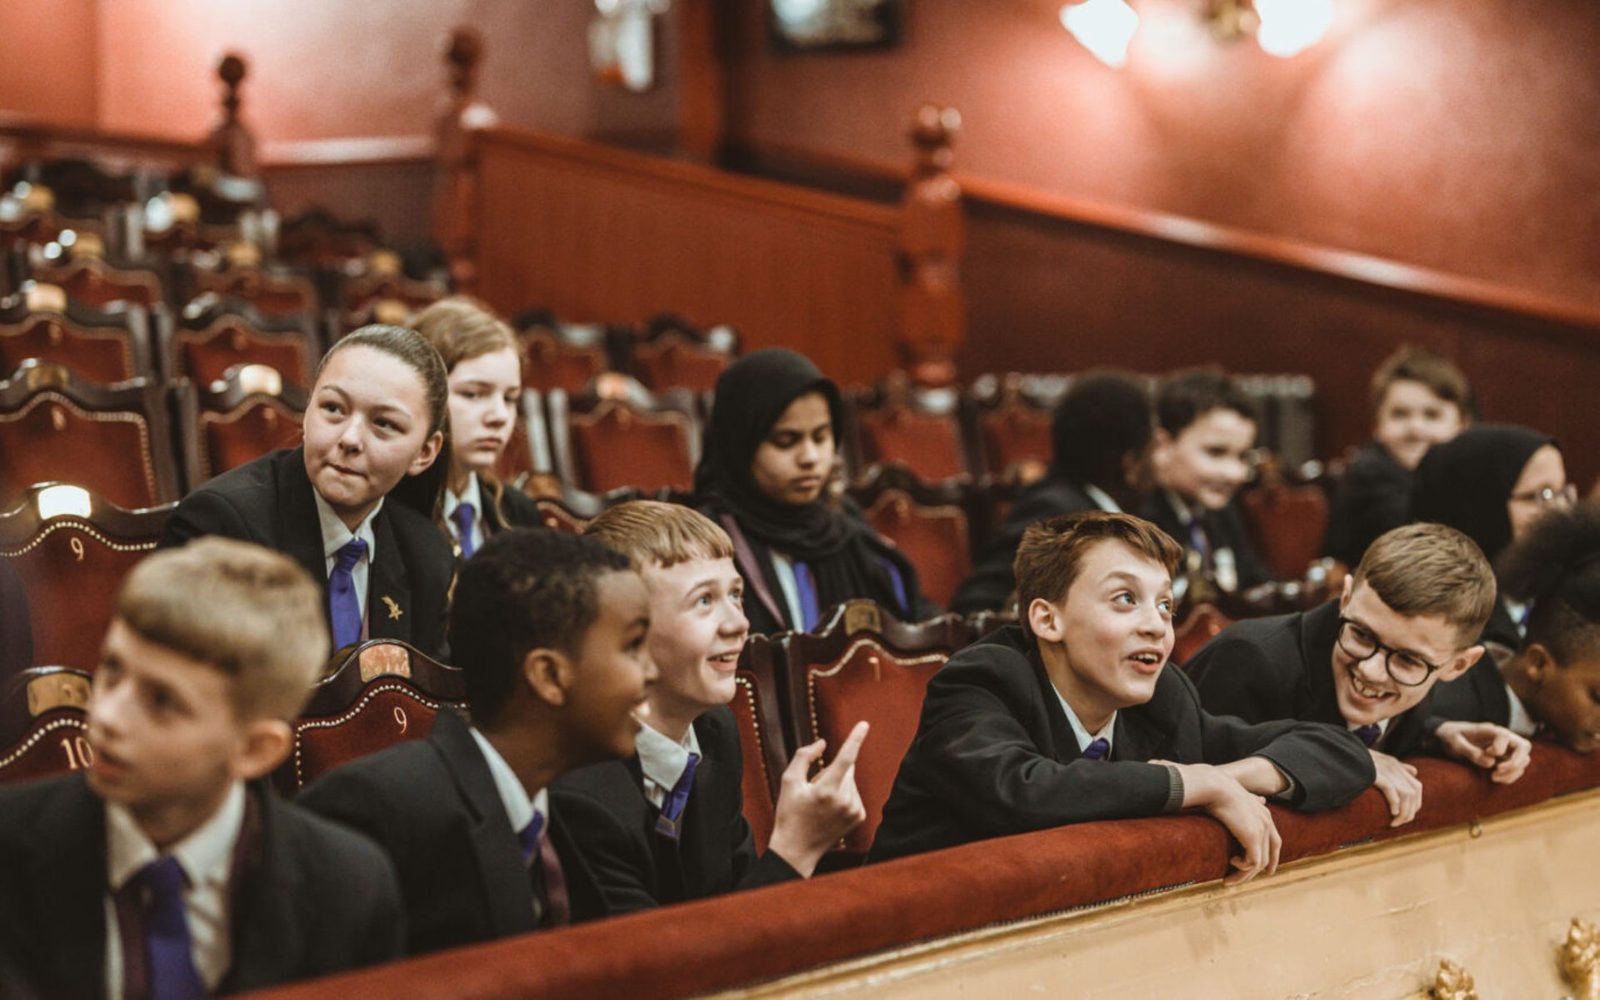 Learning and Engagement at City Varieties Music Hall